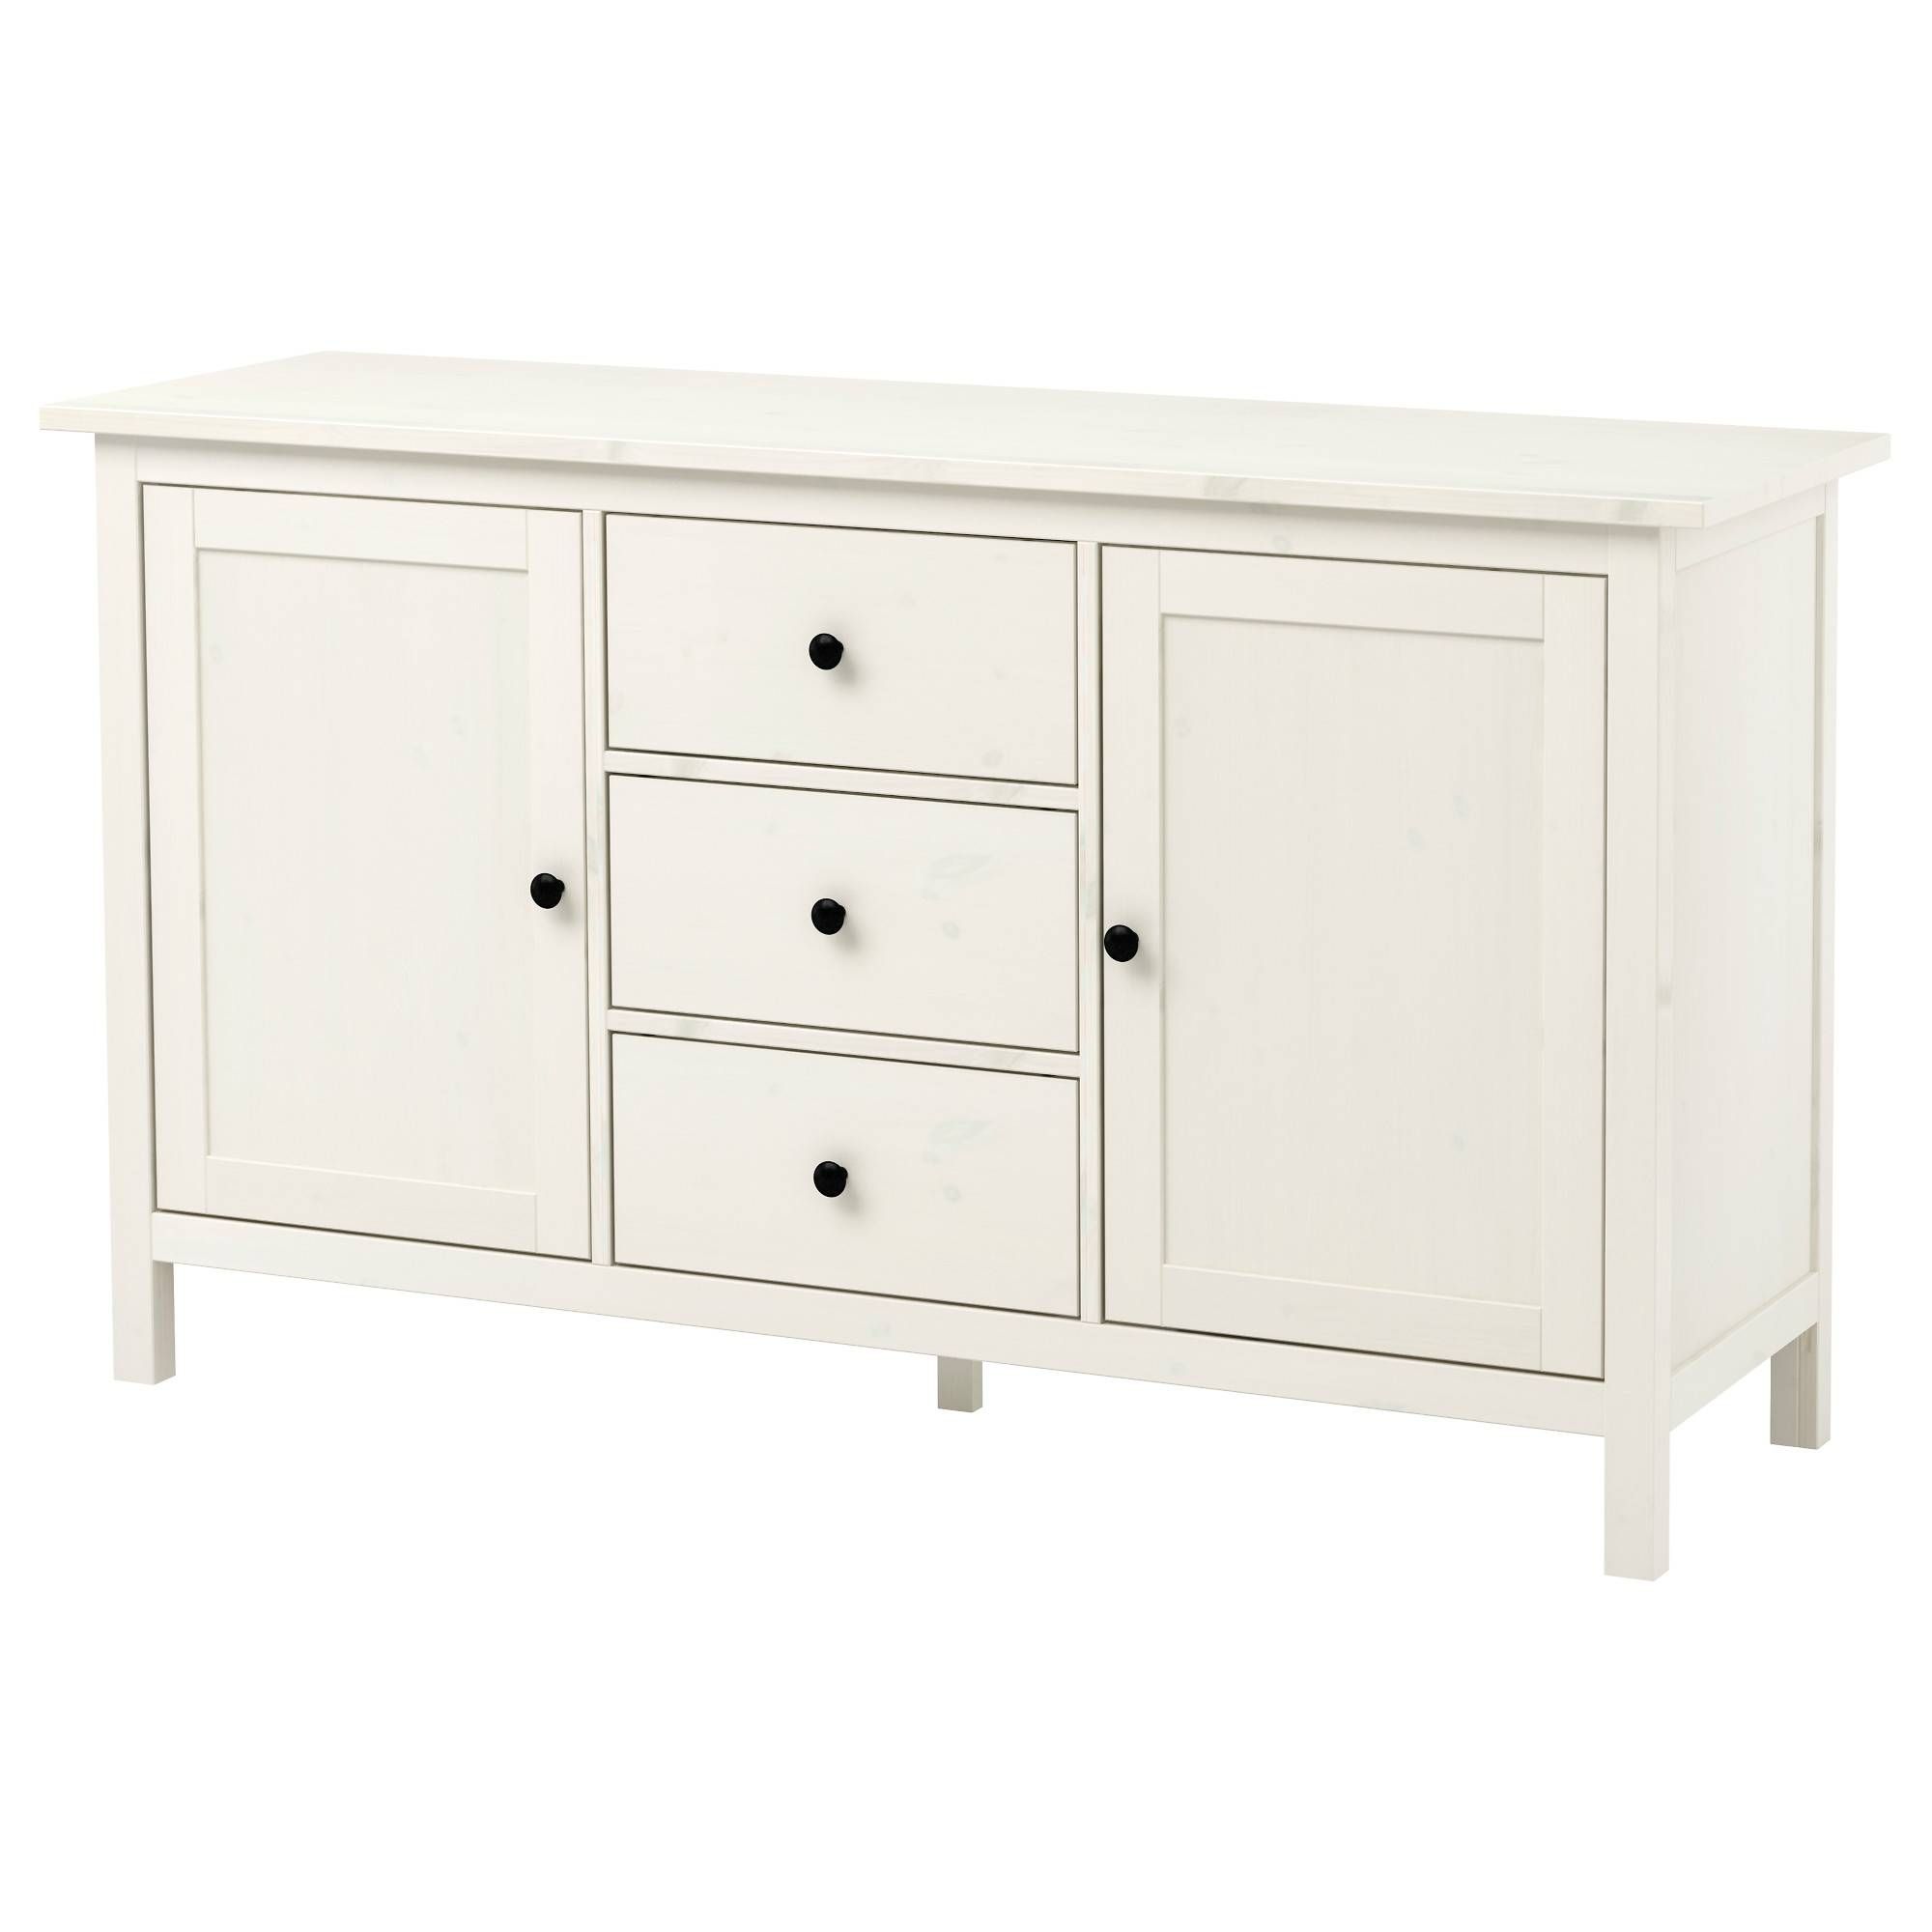 Hemnes Sideboard – White Stain – Ikea Regarding Latest Extra Deep Sideboards (View 10 of 15)